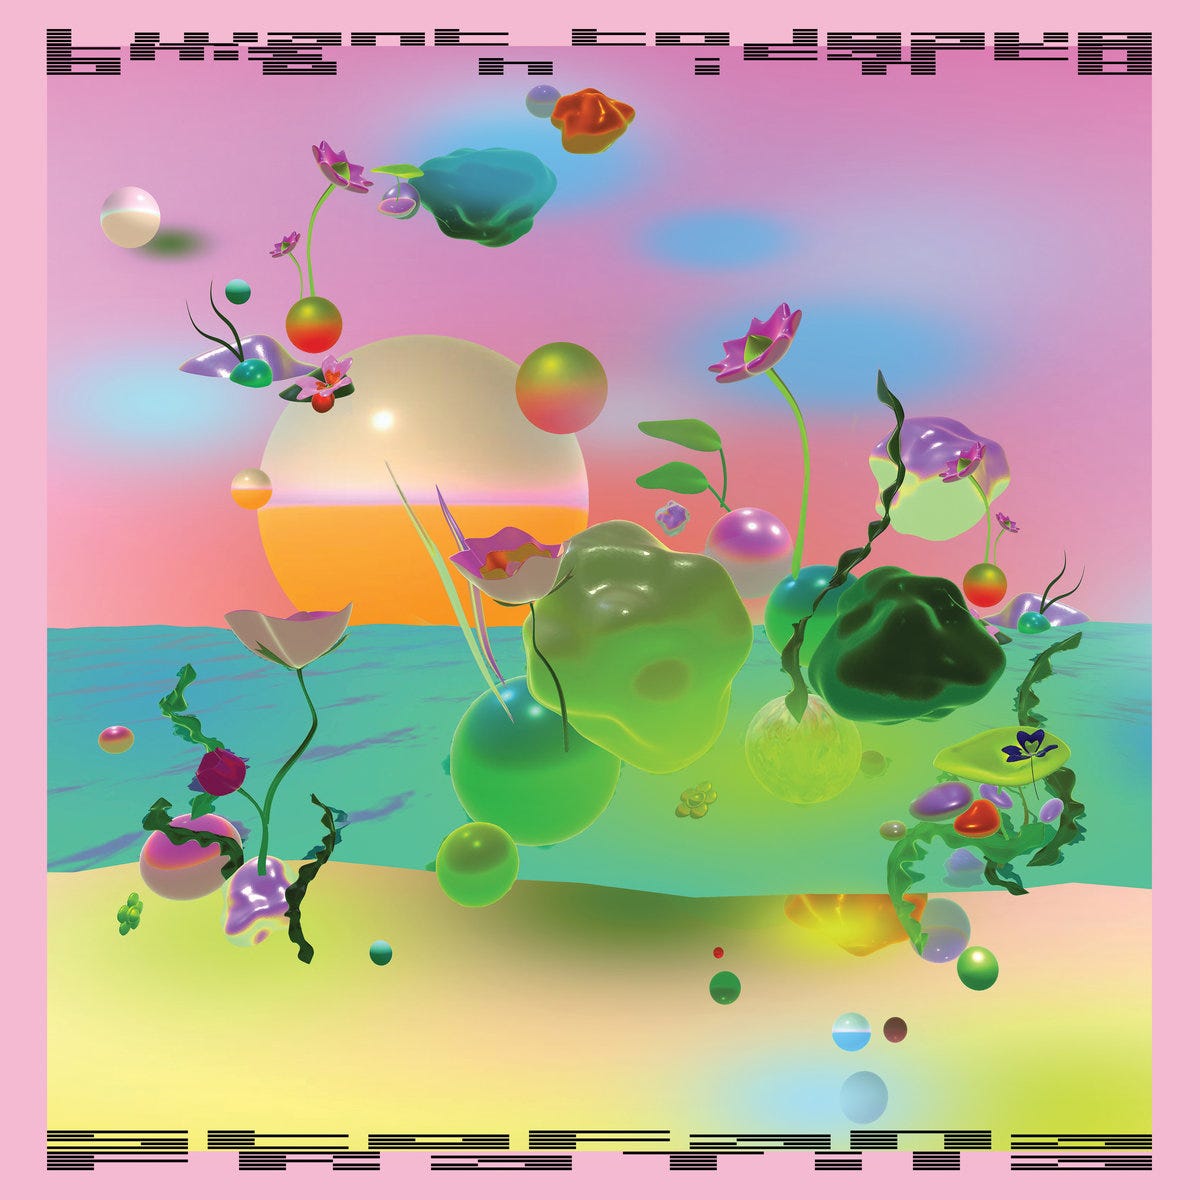 A colourful digital illustration made up of pastel and fluorescent shapes. There is a soft pink border and difficult to decipher black text along the top and bottom sides of the graphic. There is a turquoise ocean and orange sun in the background. There are flowers made up of fantastical forms and spheres of varied sizes throughout the graphic.